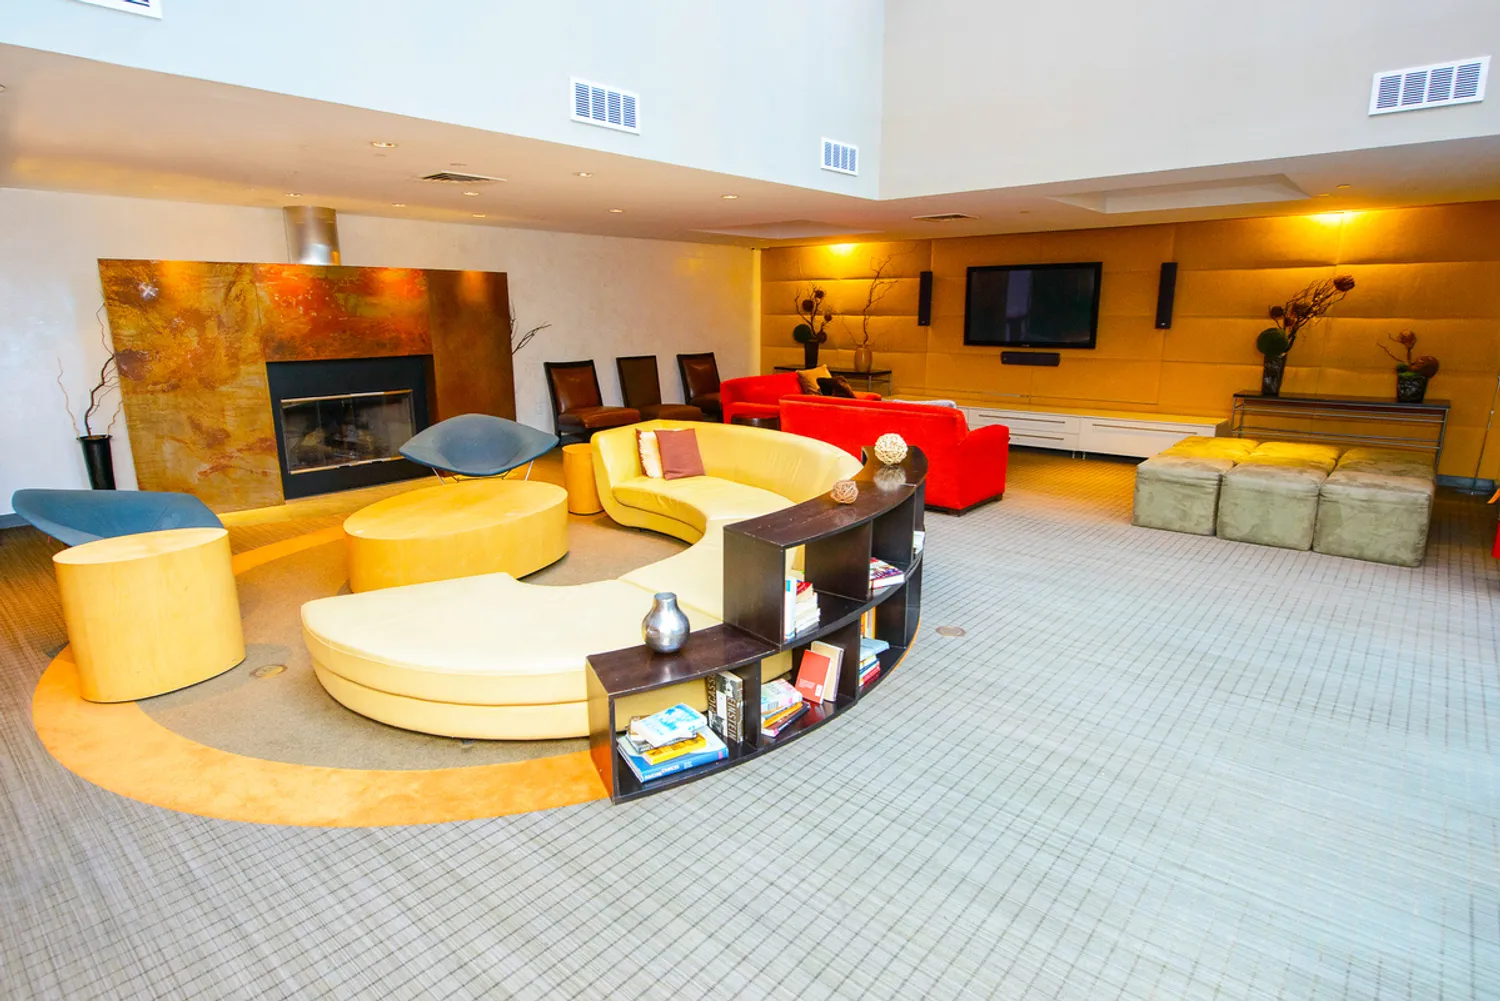 residents' lounge